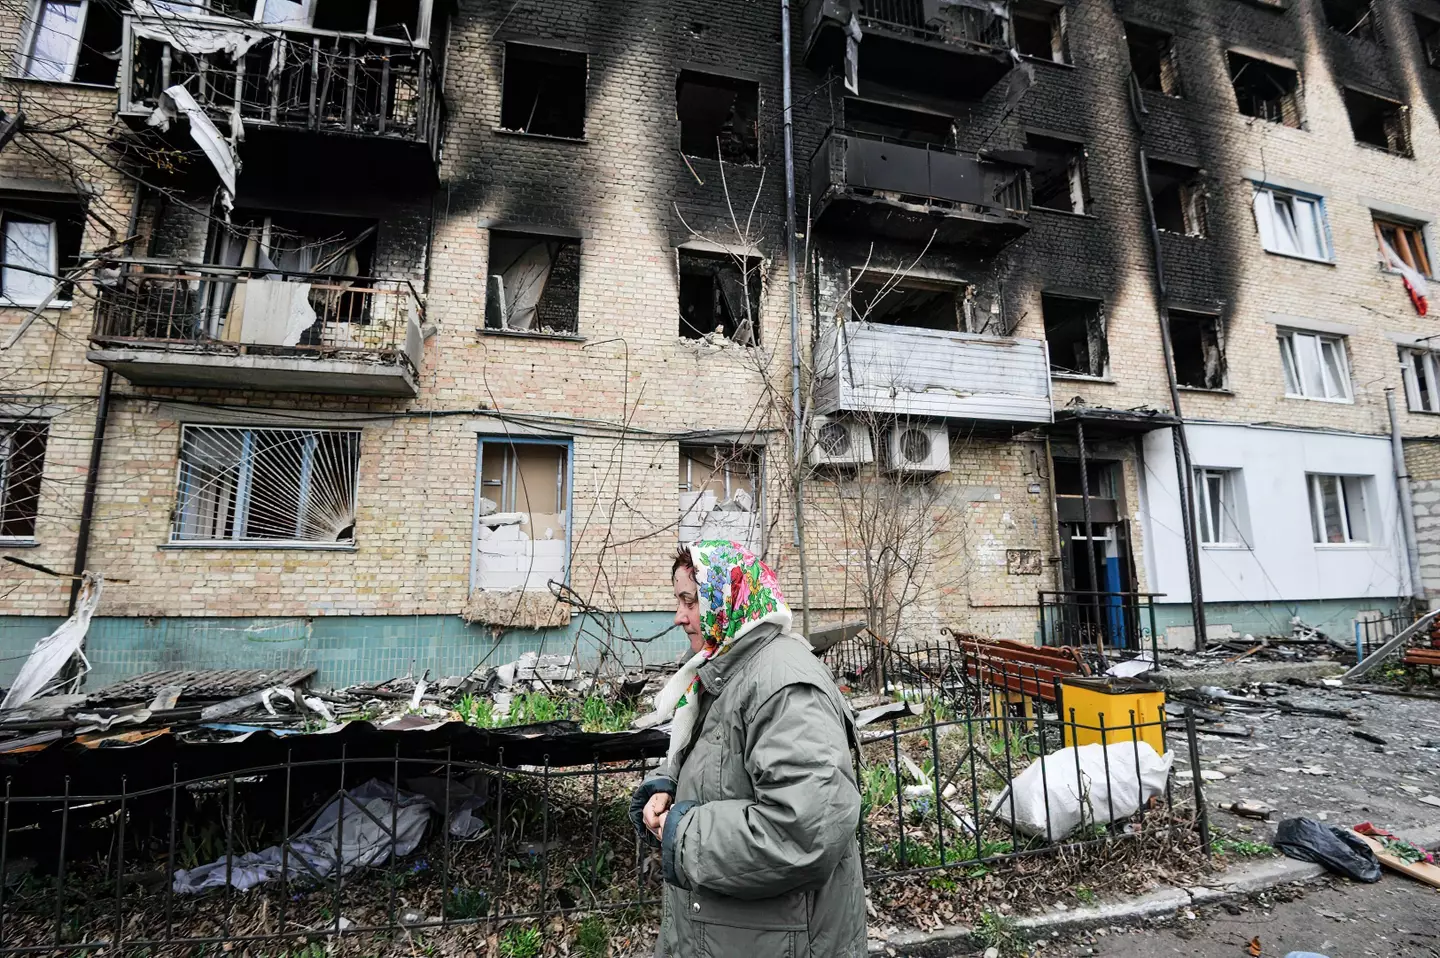 Ukraine has faced utter devastation since the Russian invasion began almost two months ago.